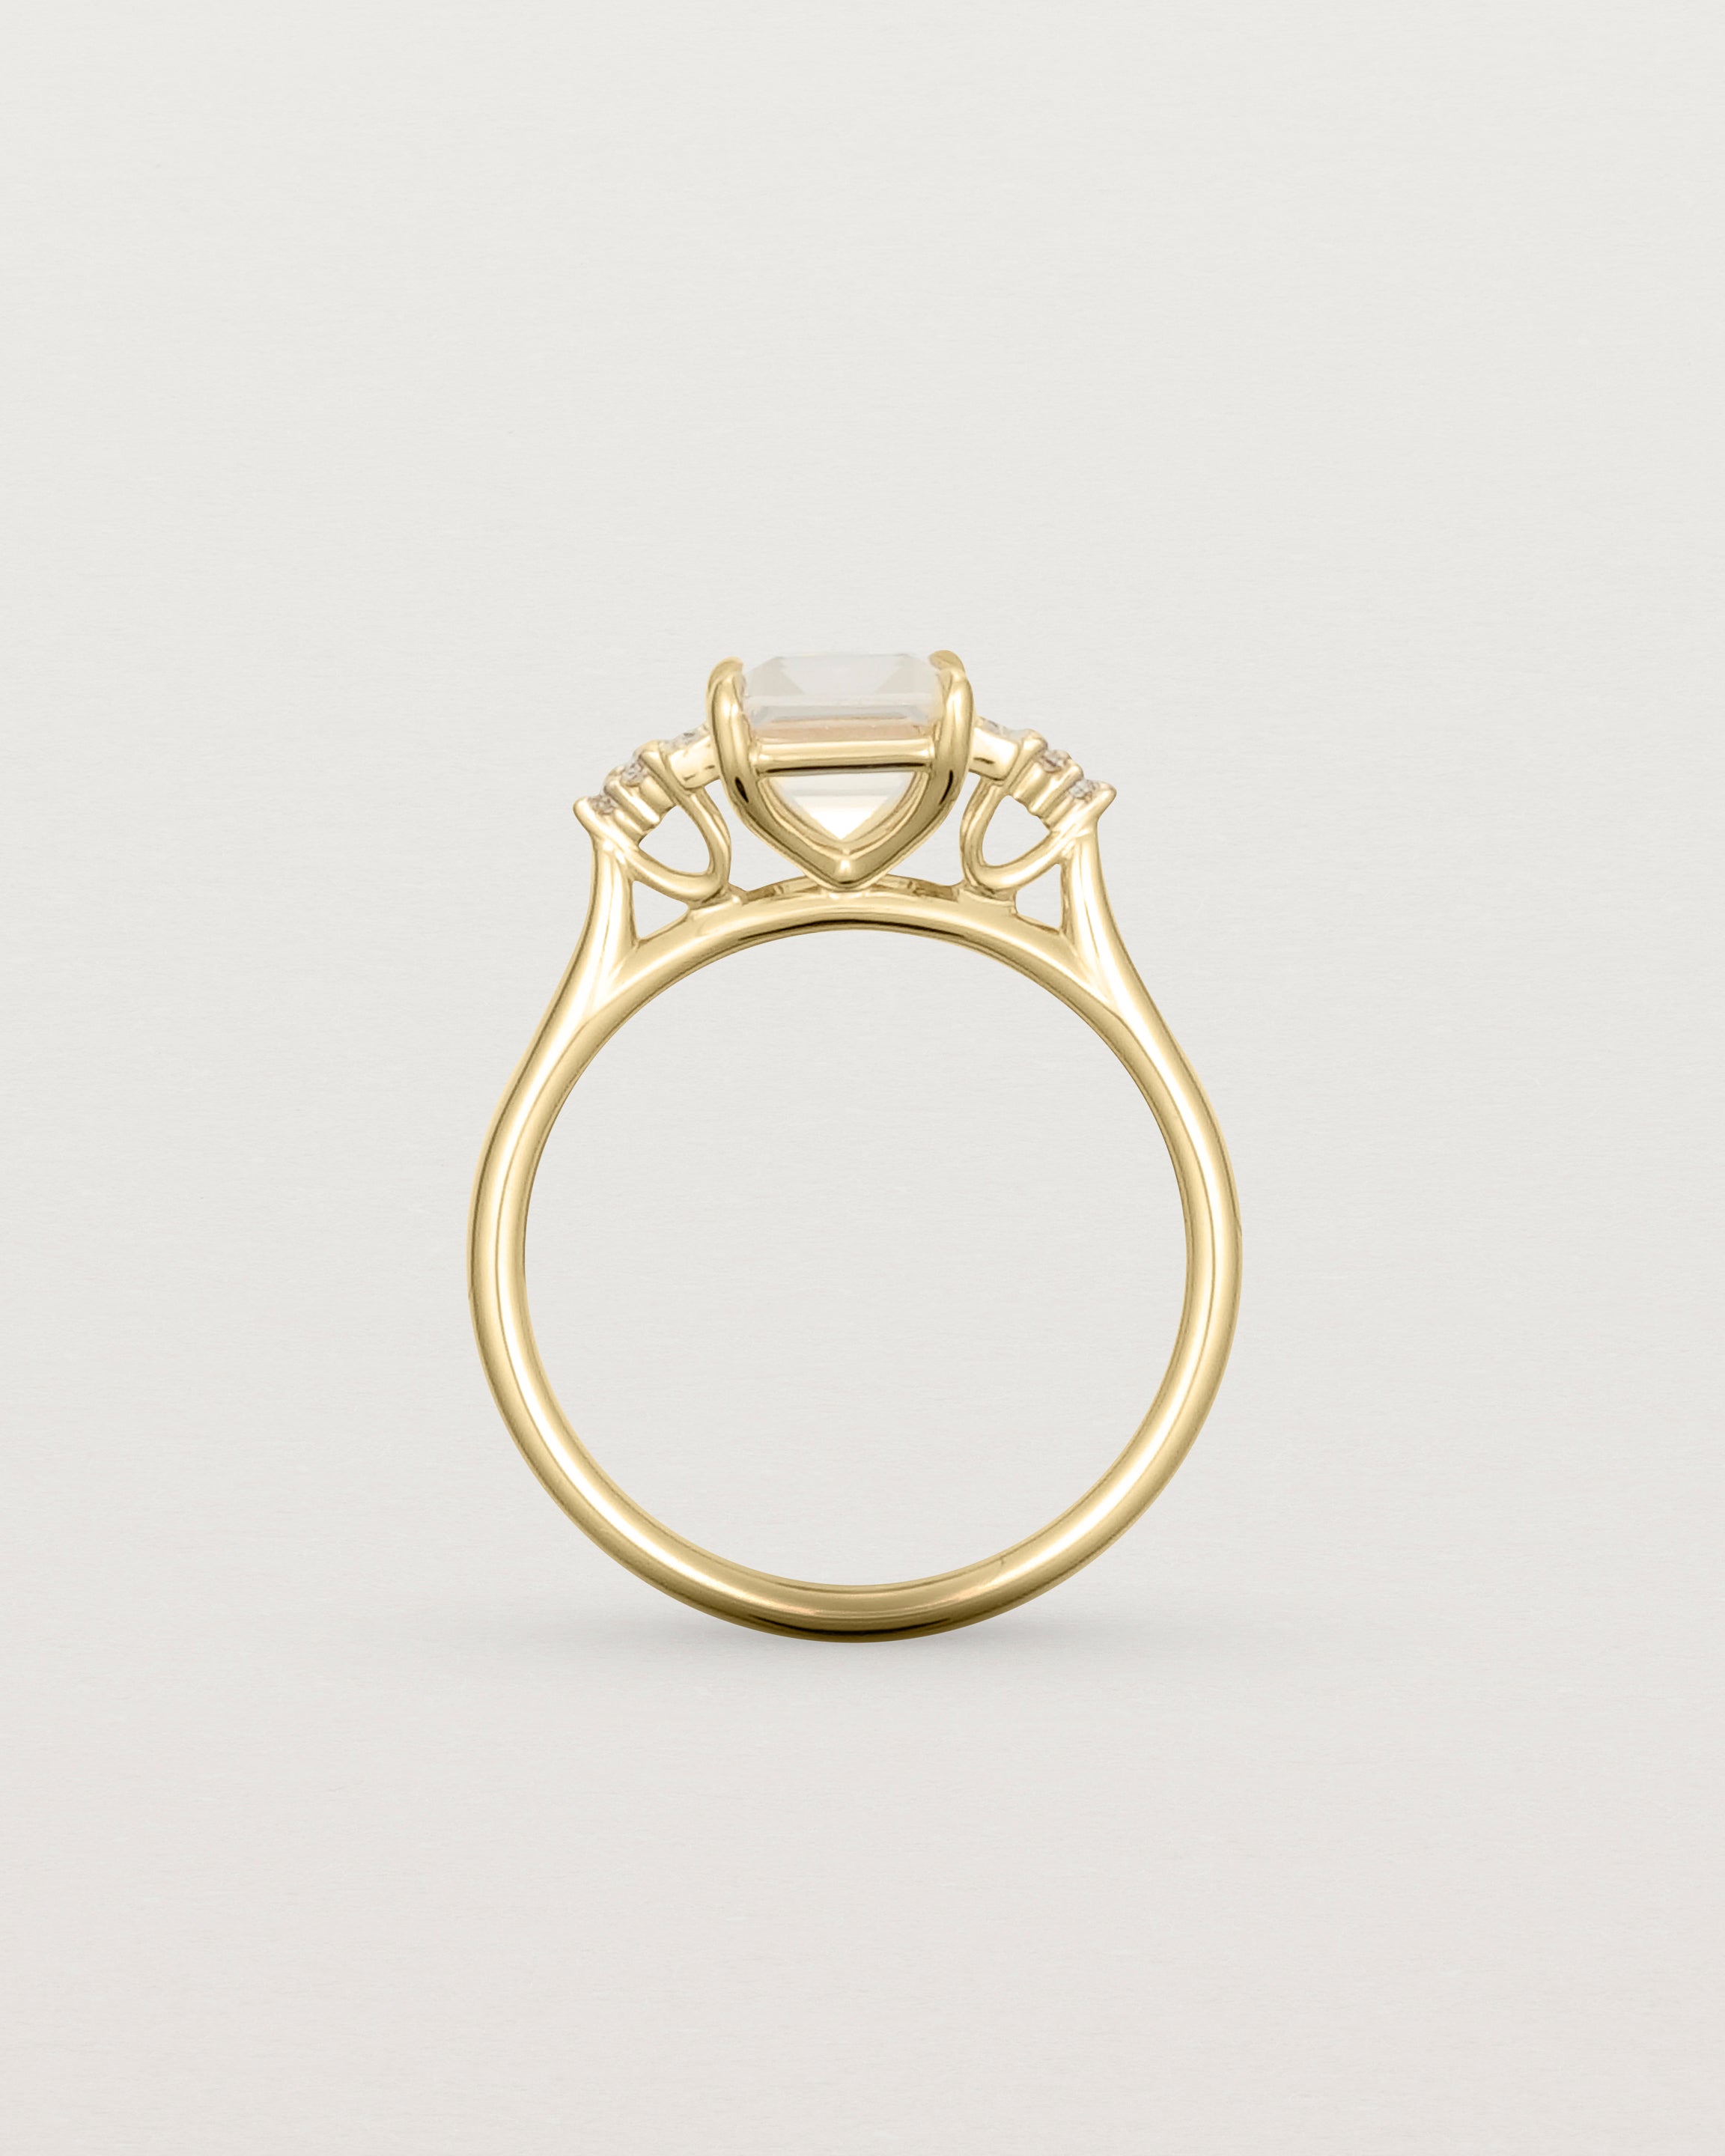 Standing view of the Elodie Ring featuring a pale pink emerald cut morganite in yellow gold